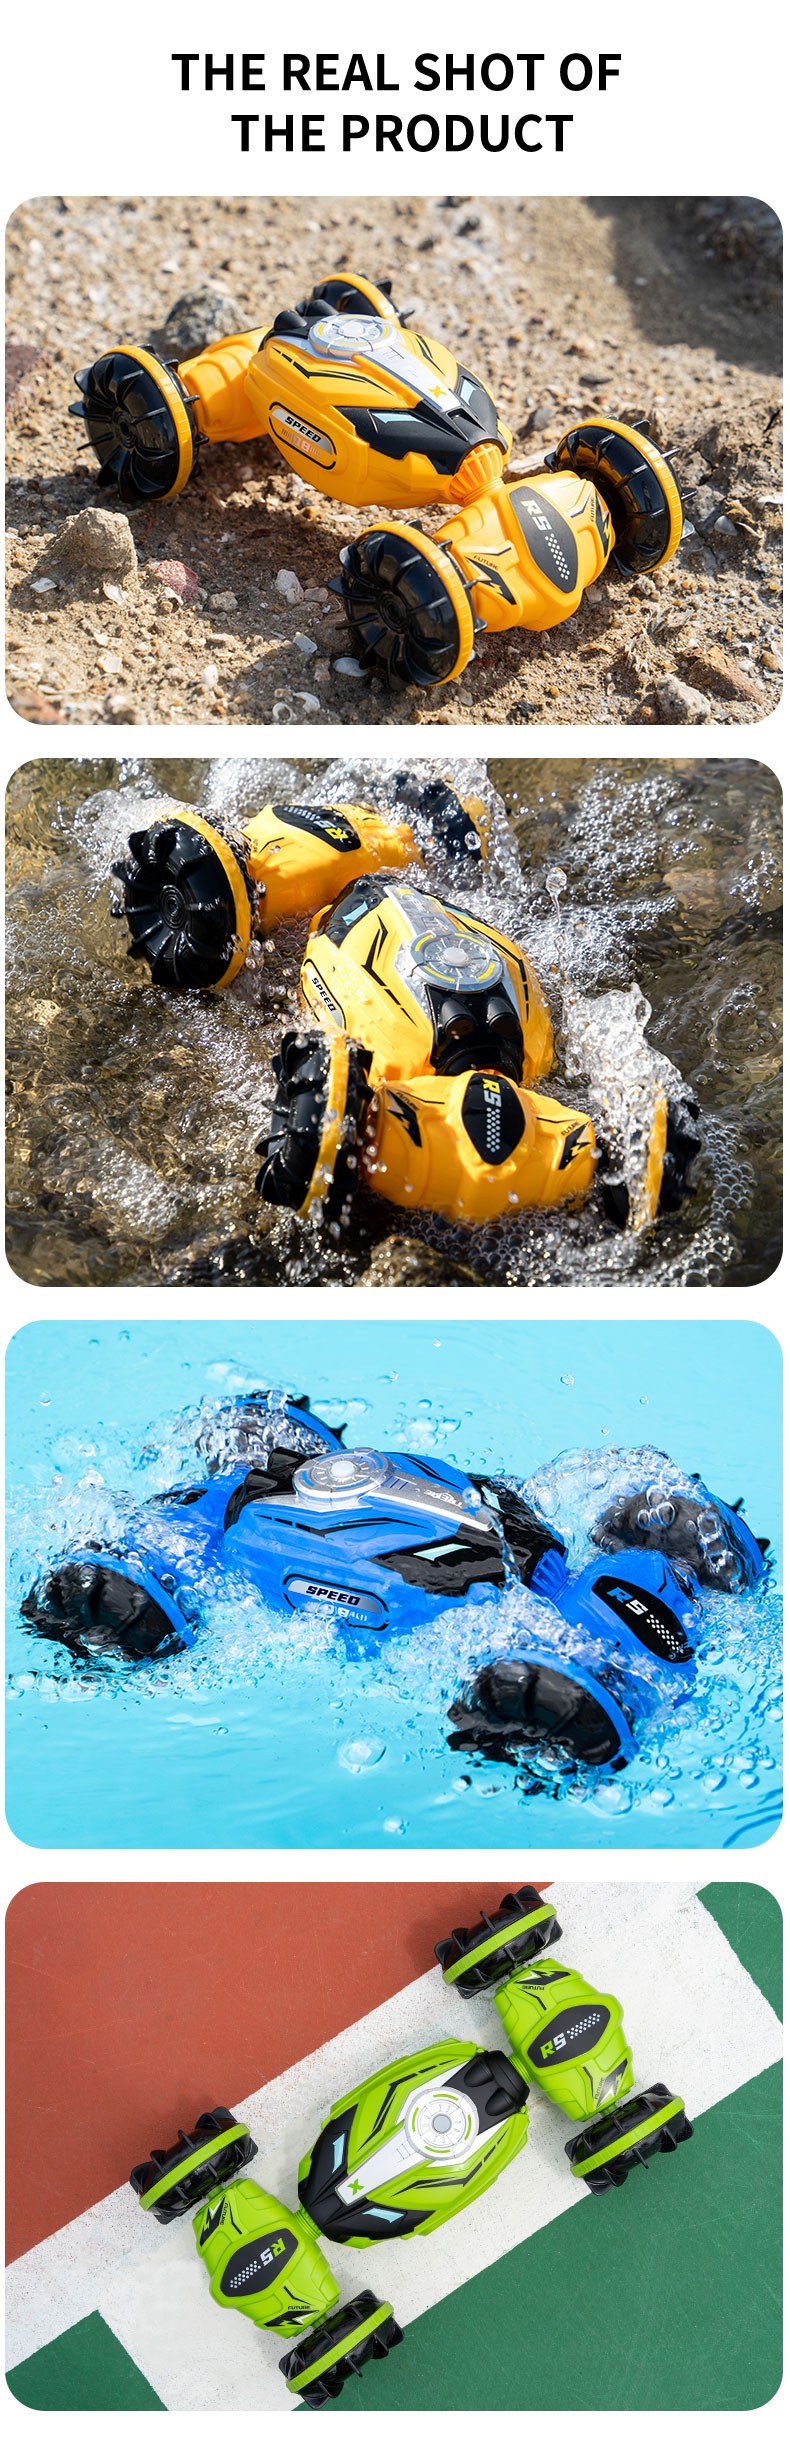 JJRC Q150 Armored mighty-warrior car with twistable and amphibious